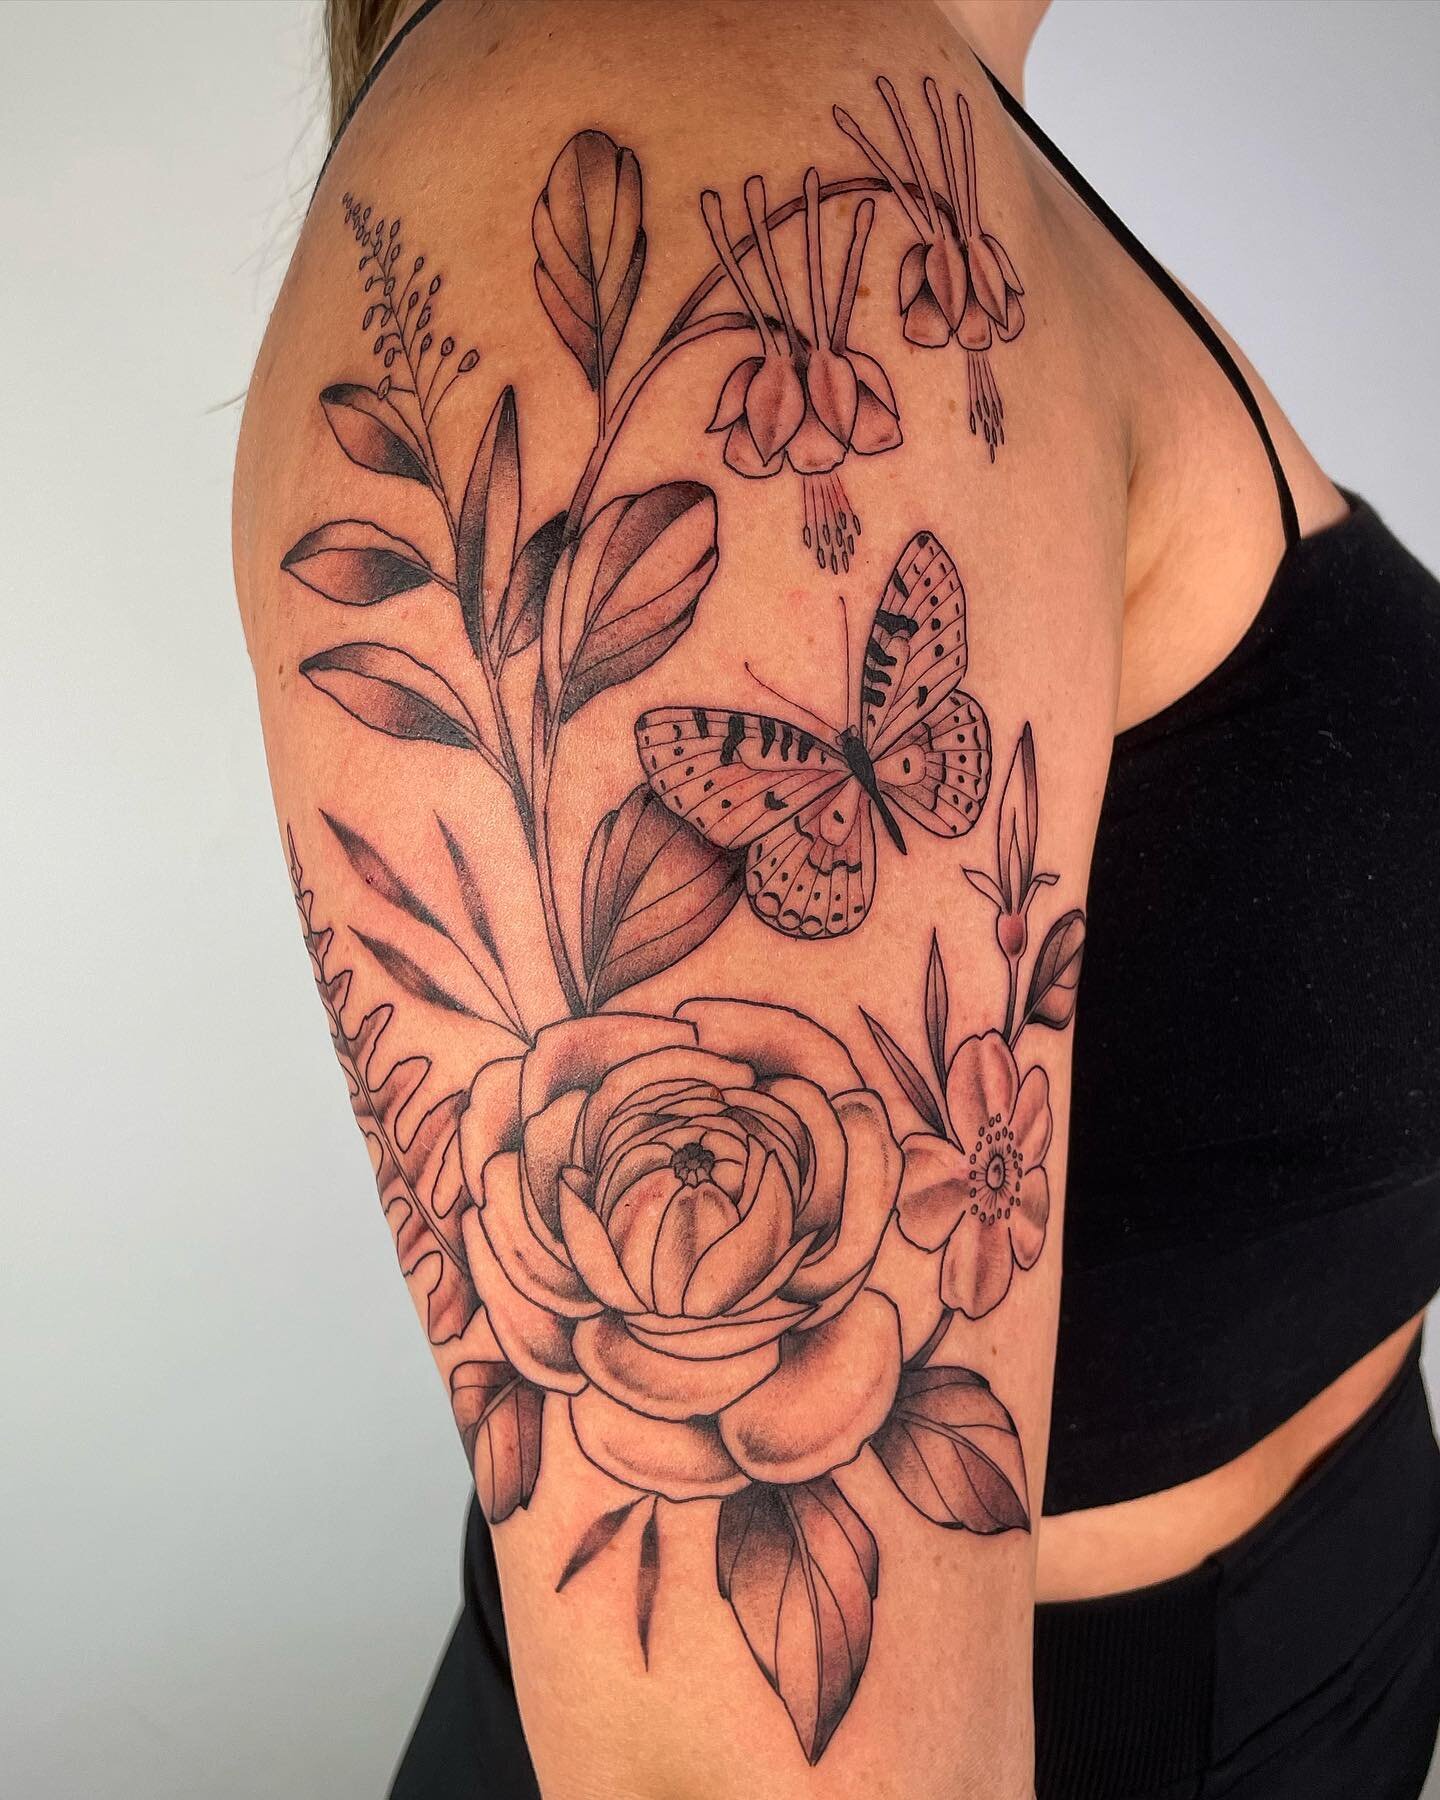 Thank you teyah!! Always appreciate you coming to see me 🌸 would love to do more this size! This one only took about 3 hours. 
.
.
.
.
.
.
.
.
.
.
.
#eugenetattoo #eugeneoregon #eugene #oregon #oregontattoo #pnw #pnwtattoo #botanicaltattoo #floralta